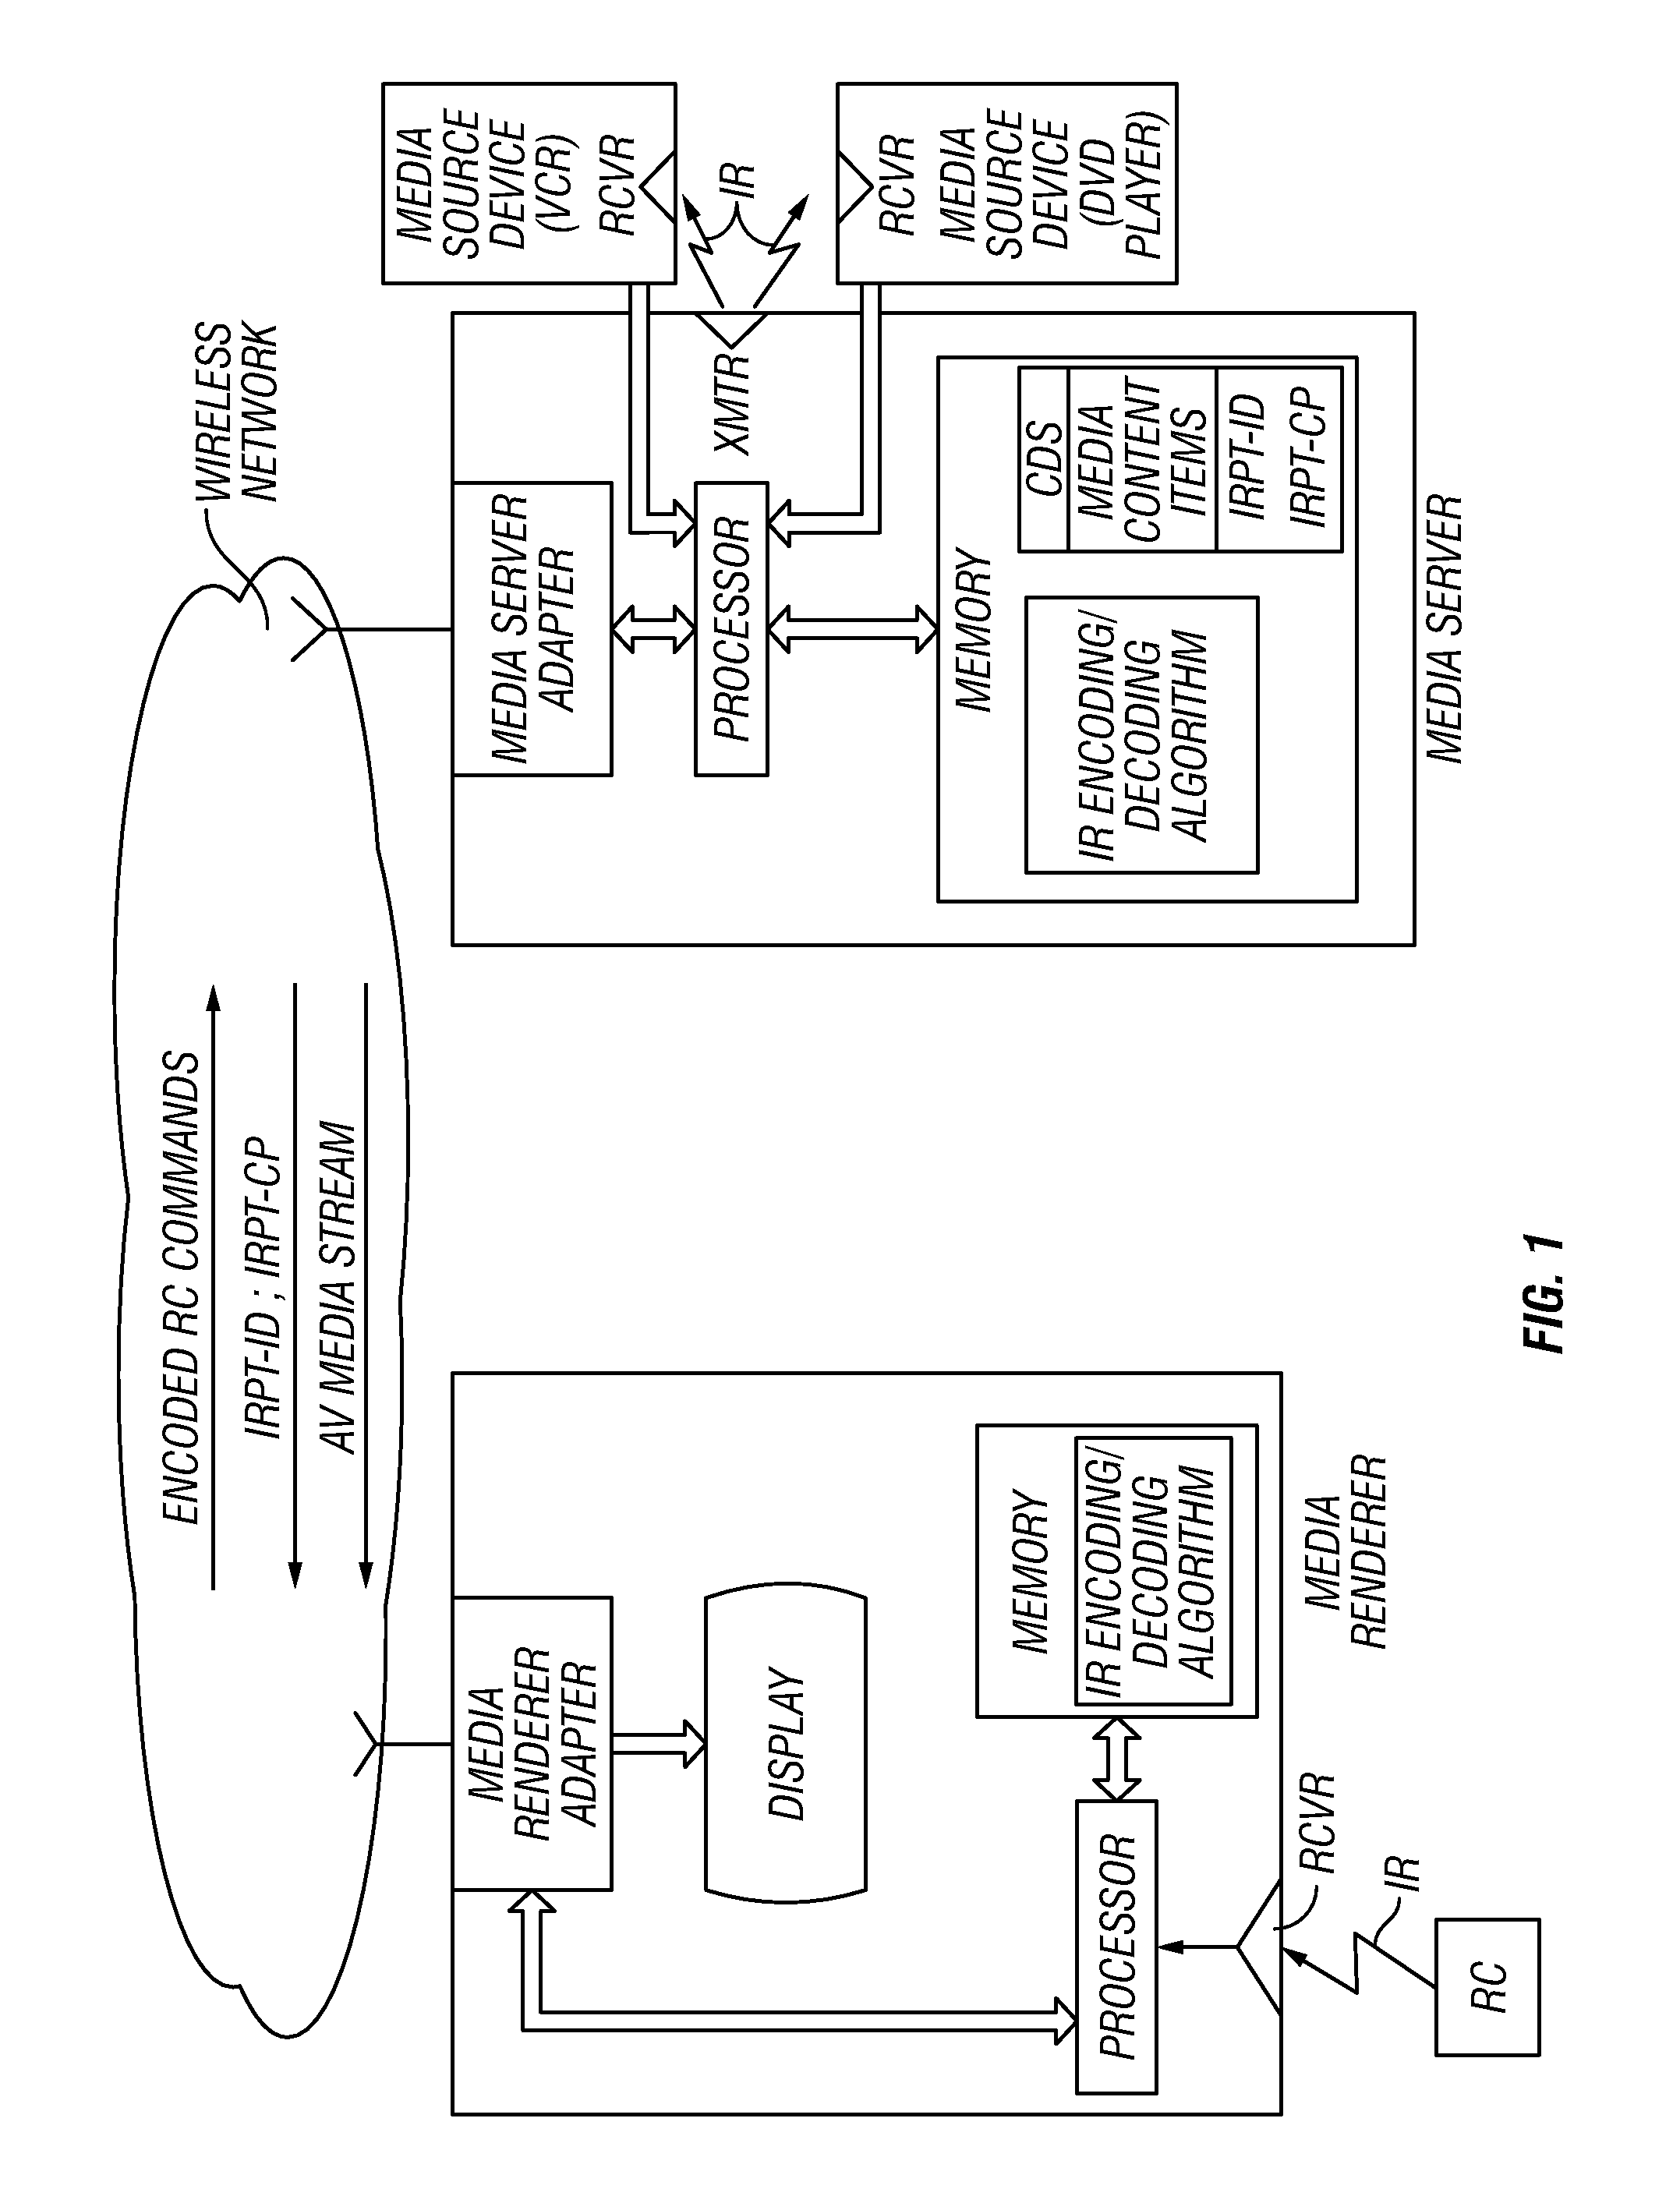 System and method for representing an infrared pass-through protocol in a home network